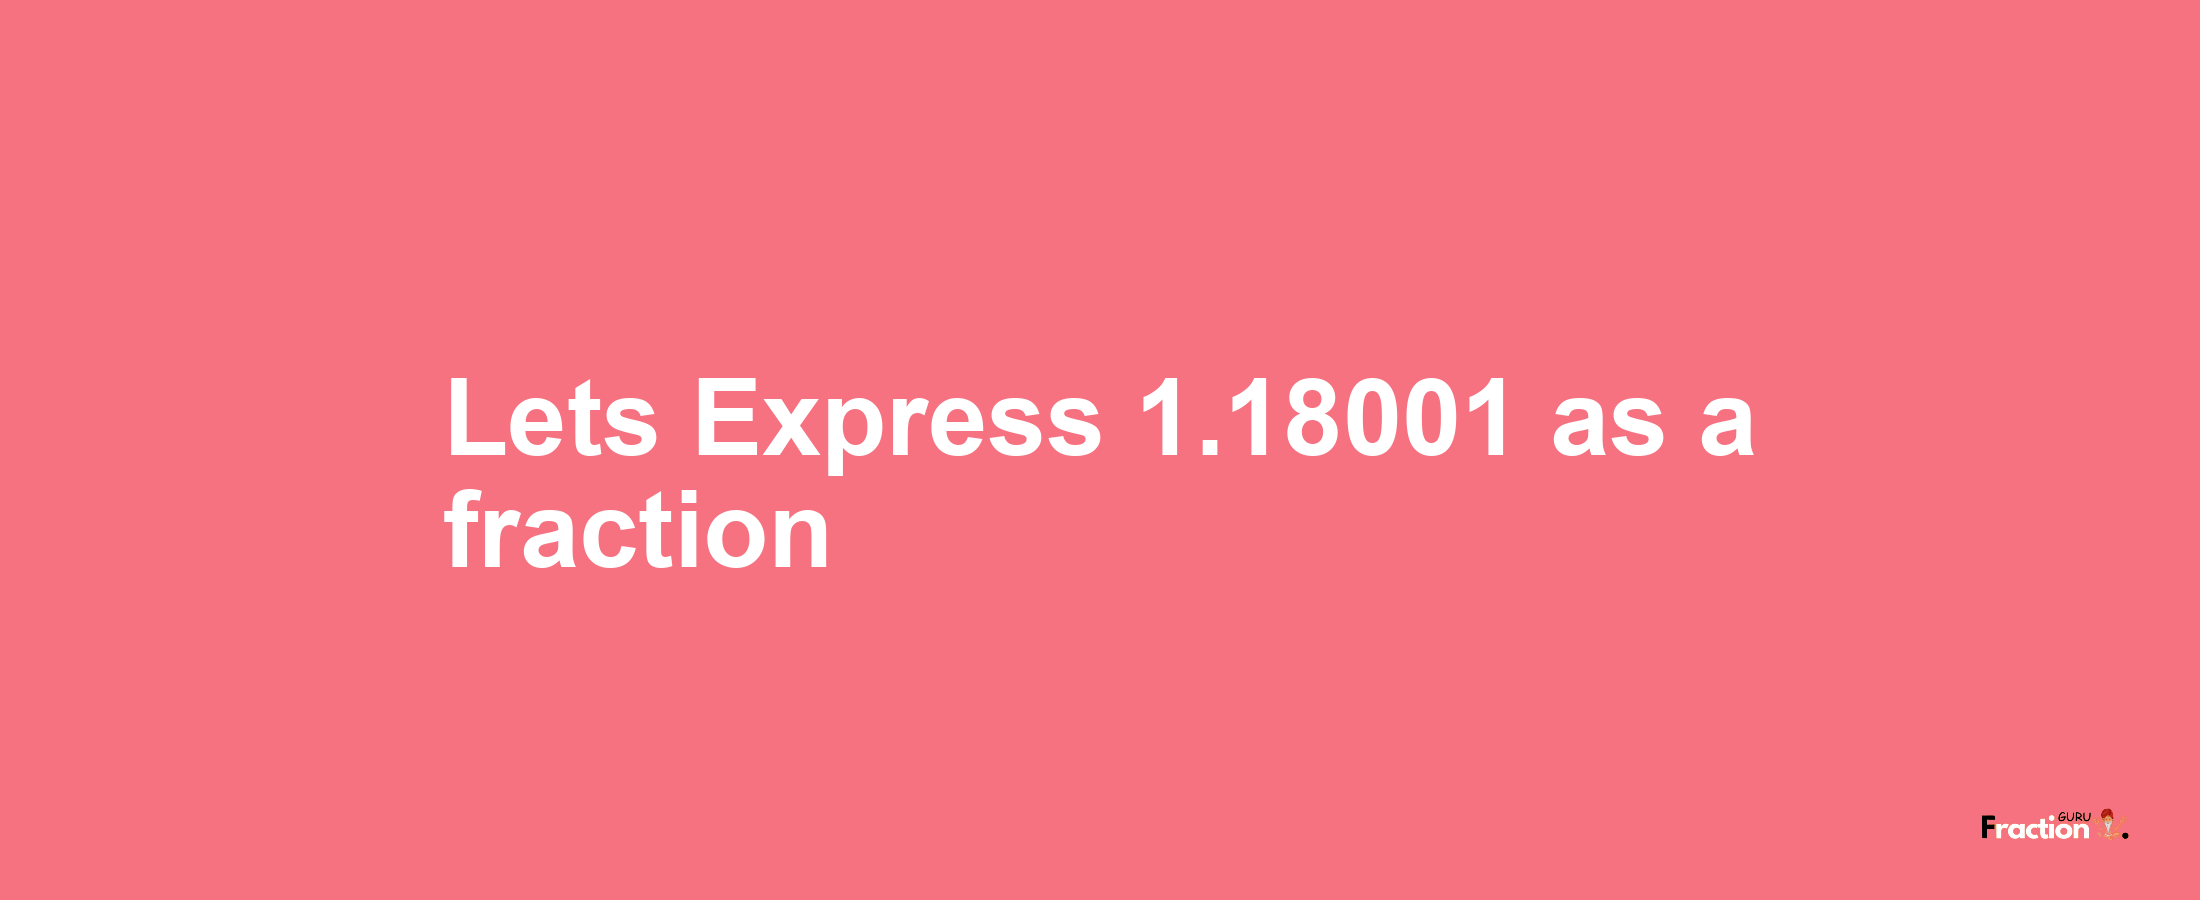 Lets Express 1.18001 as afraction